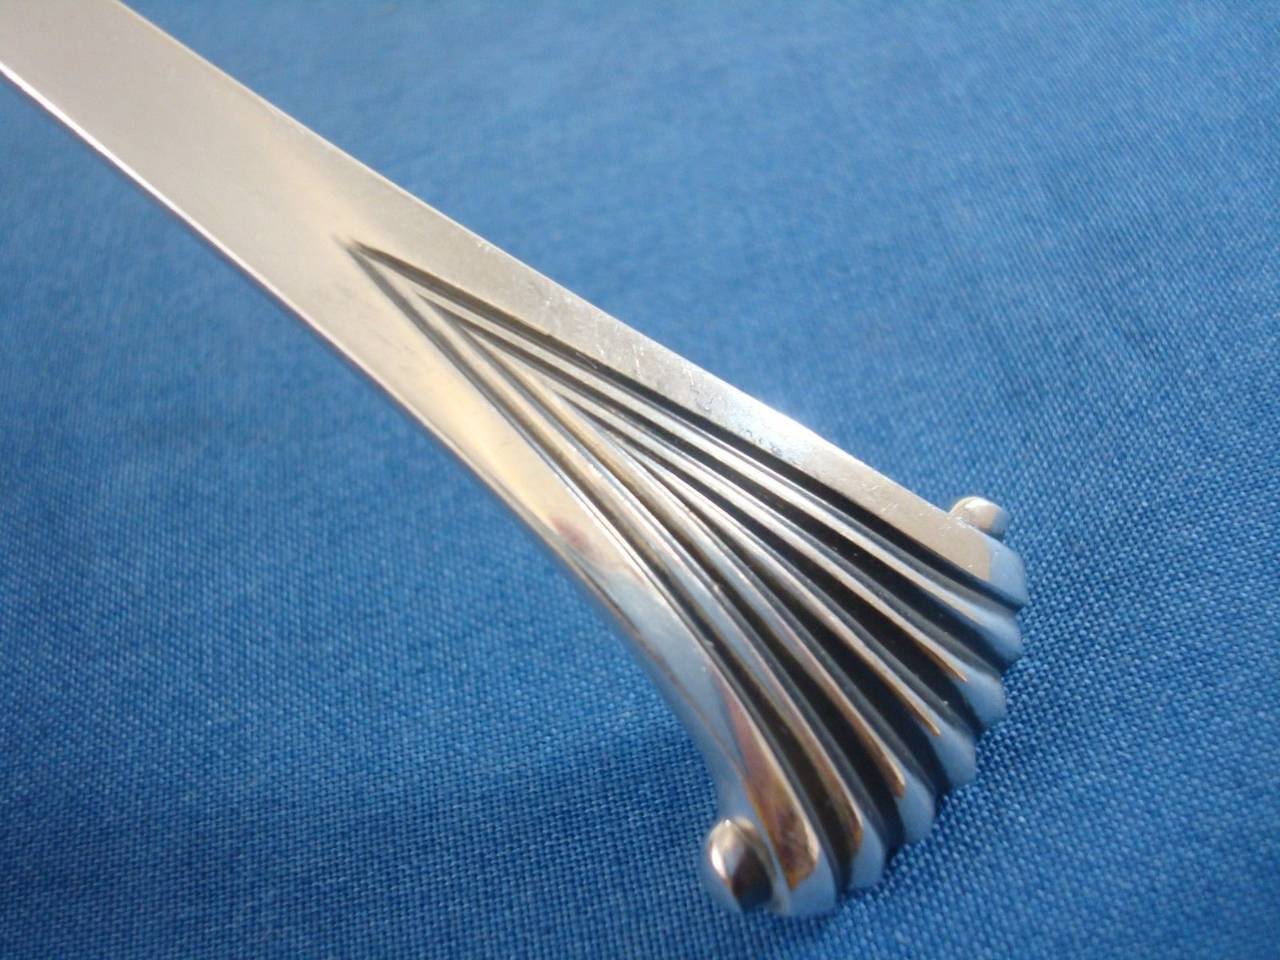 Mid-20th Century Onslow by Tuttle Sterling Silver Flatware Service for 12 Set 110 Pieces Huge